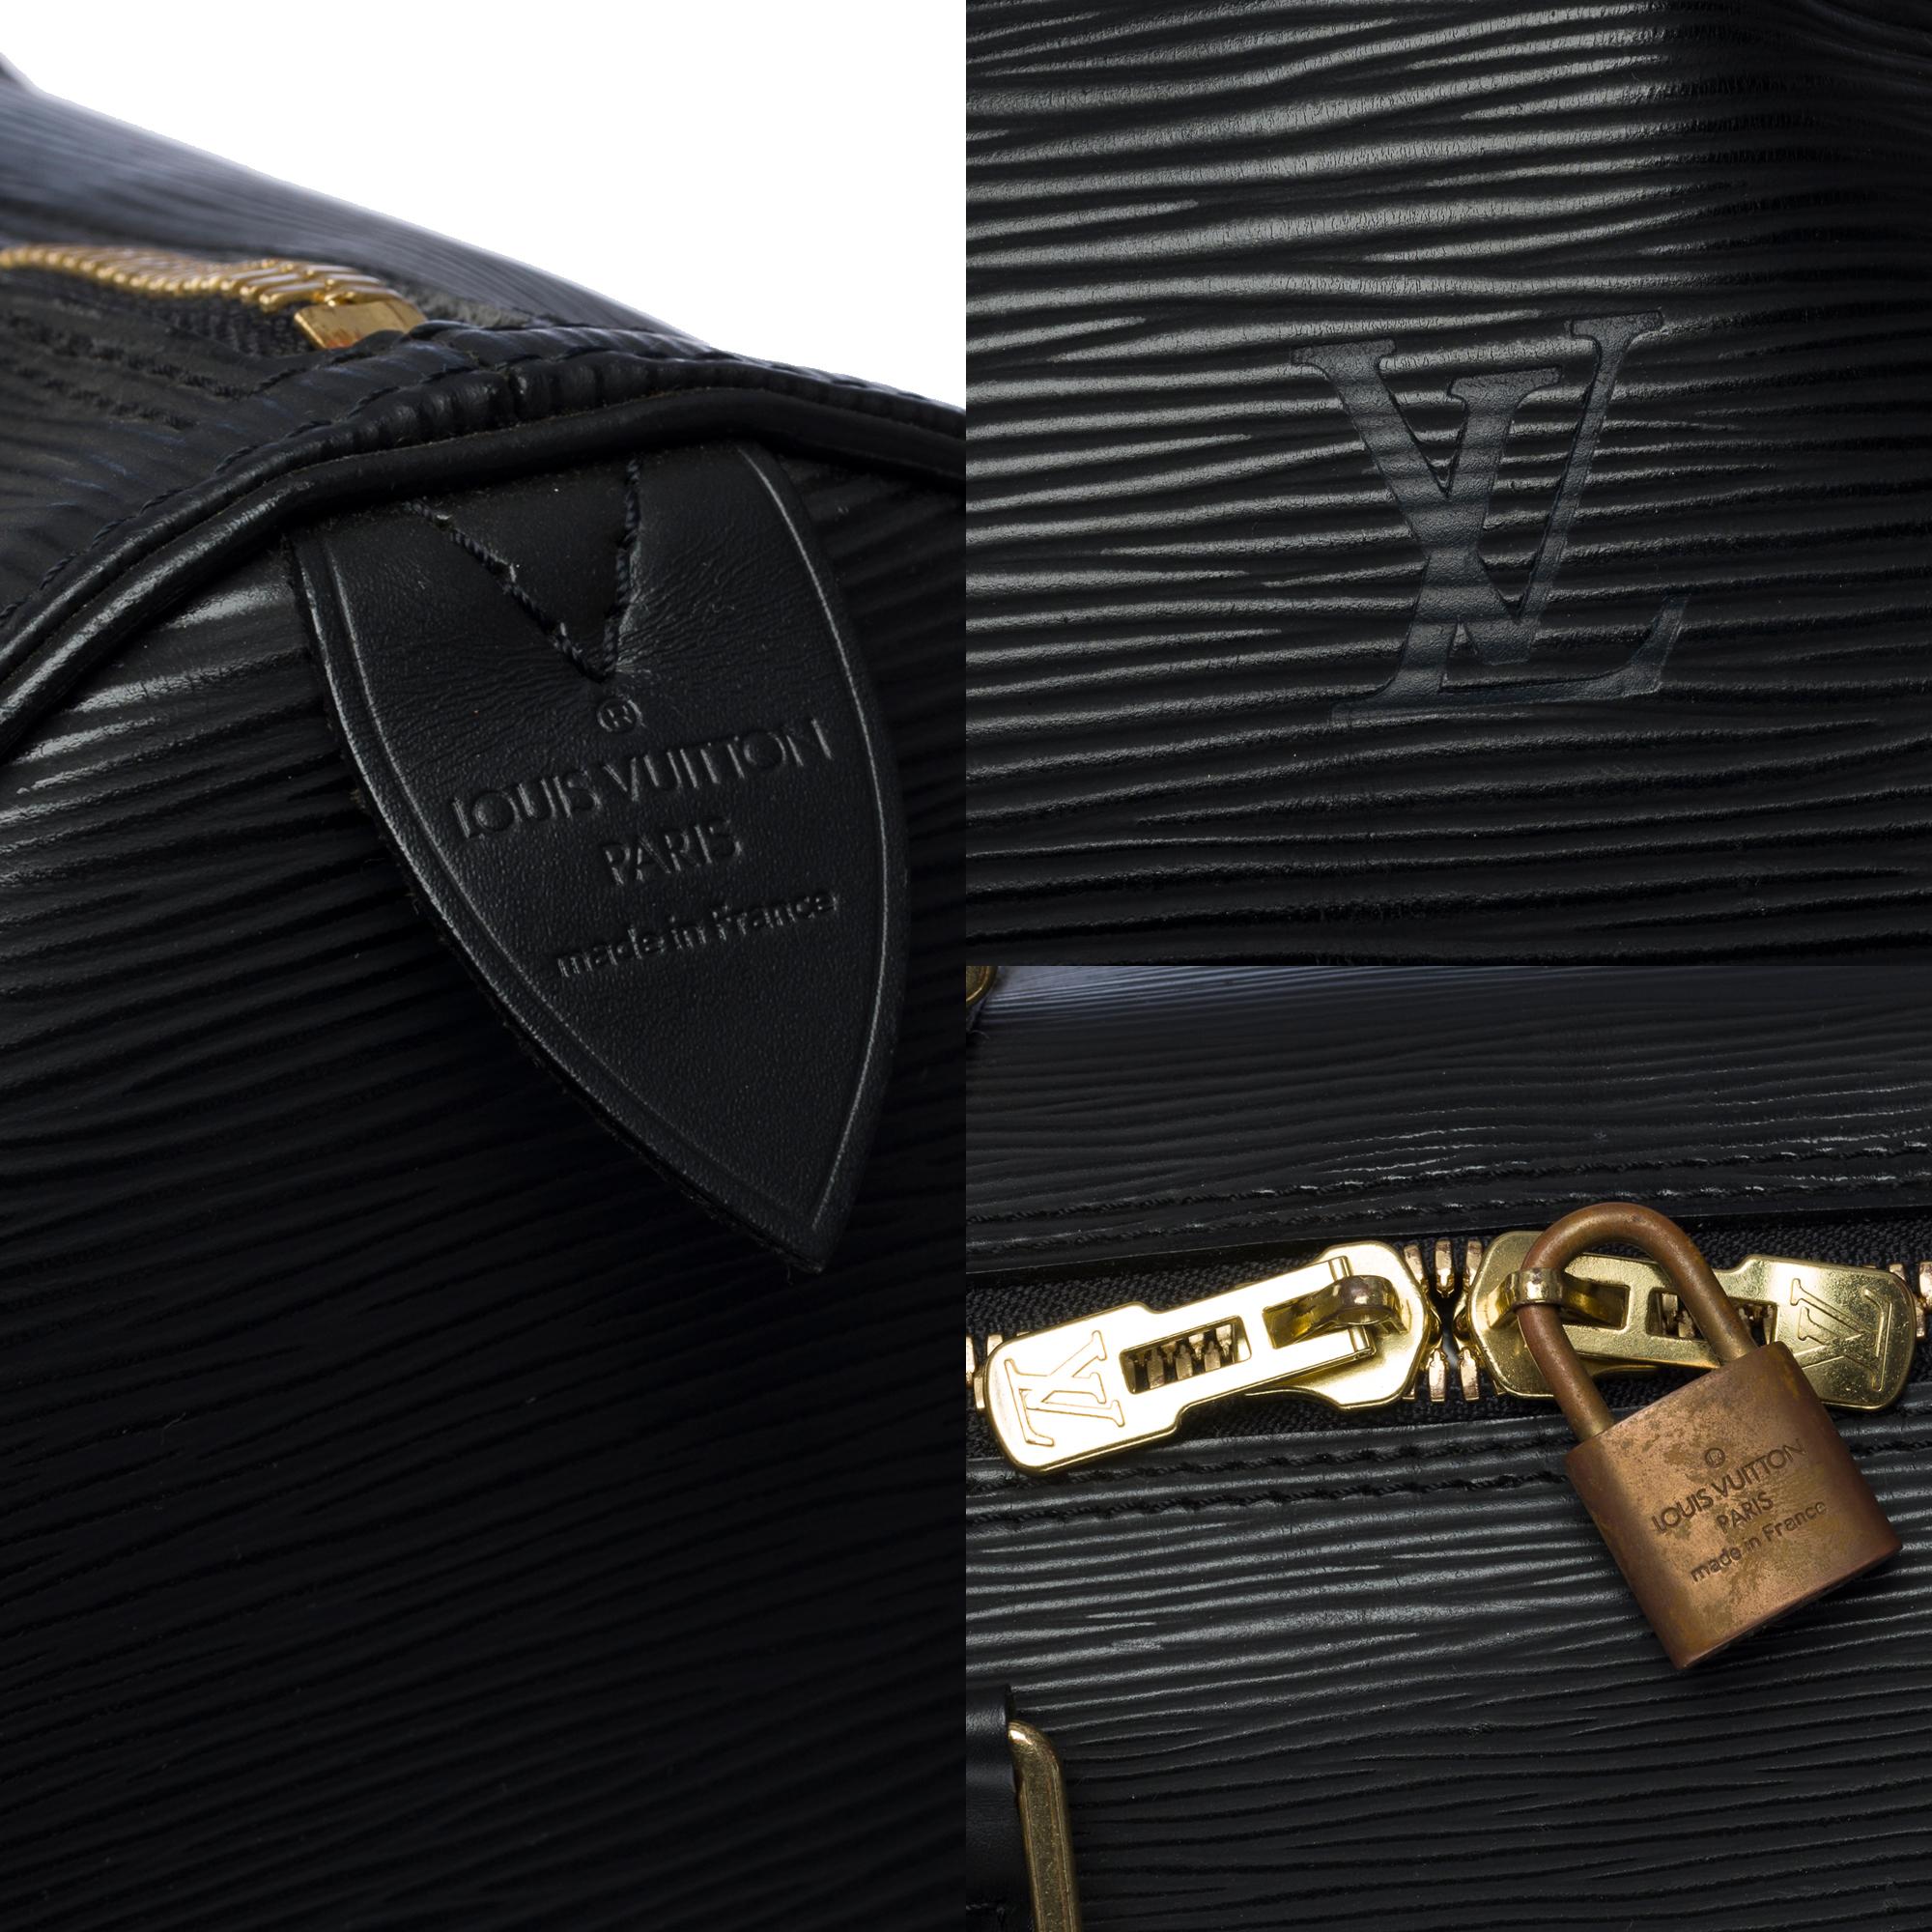 The very Chic Louis Vuitton Keepall 45 Travel bag in black epi leather, GHW 2